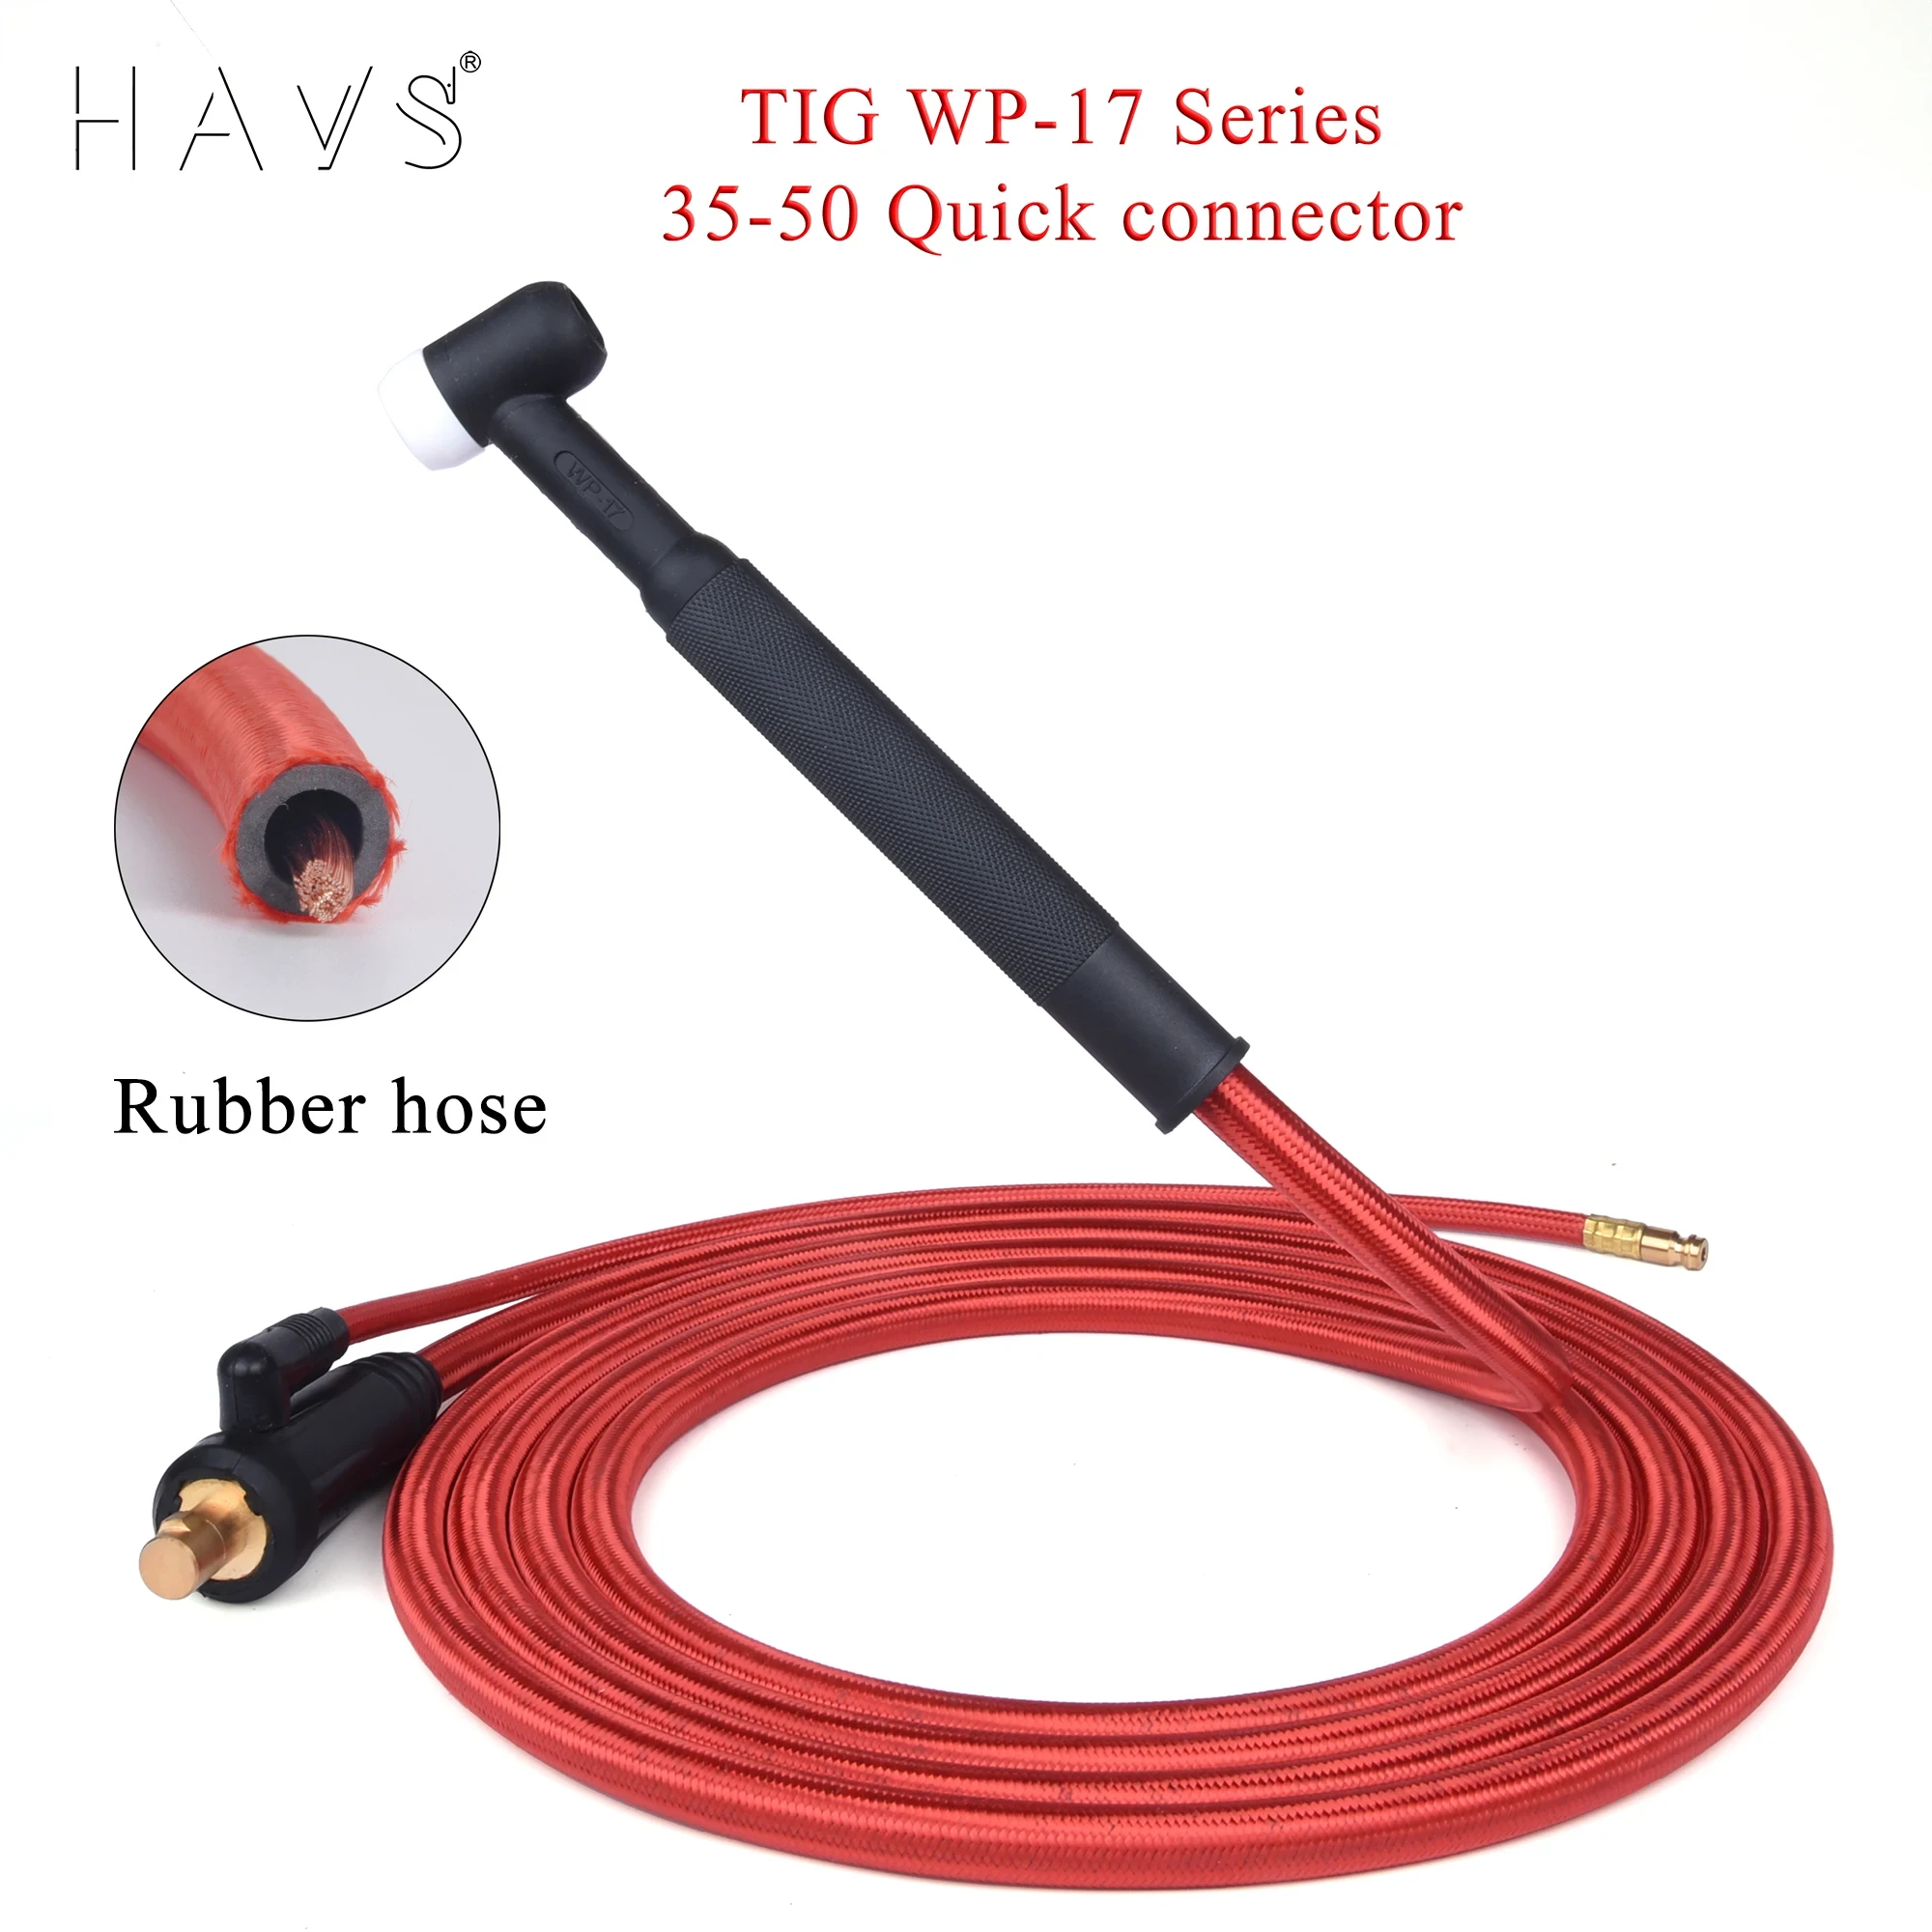 WP17 TIG Welding Torch Gas-Electric Integrated Red Hose Cable Wires 5/8 UNF Quick Connector 4M 35-50 Euro Connector 13.12Ft